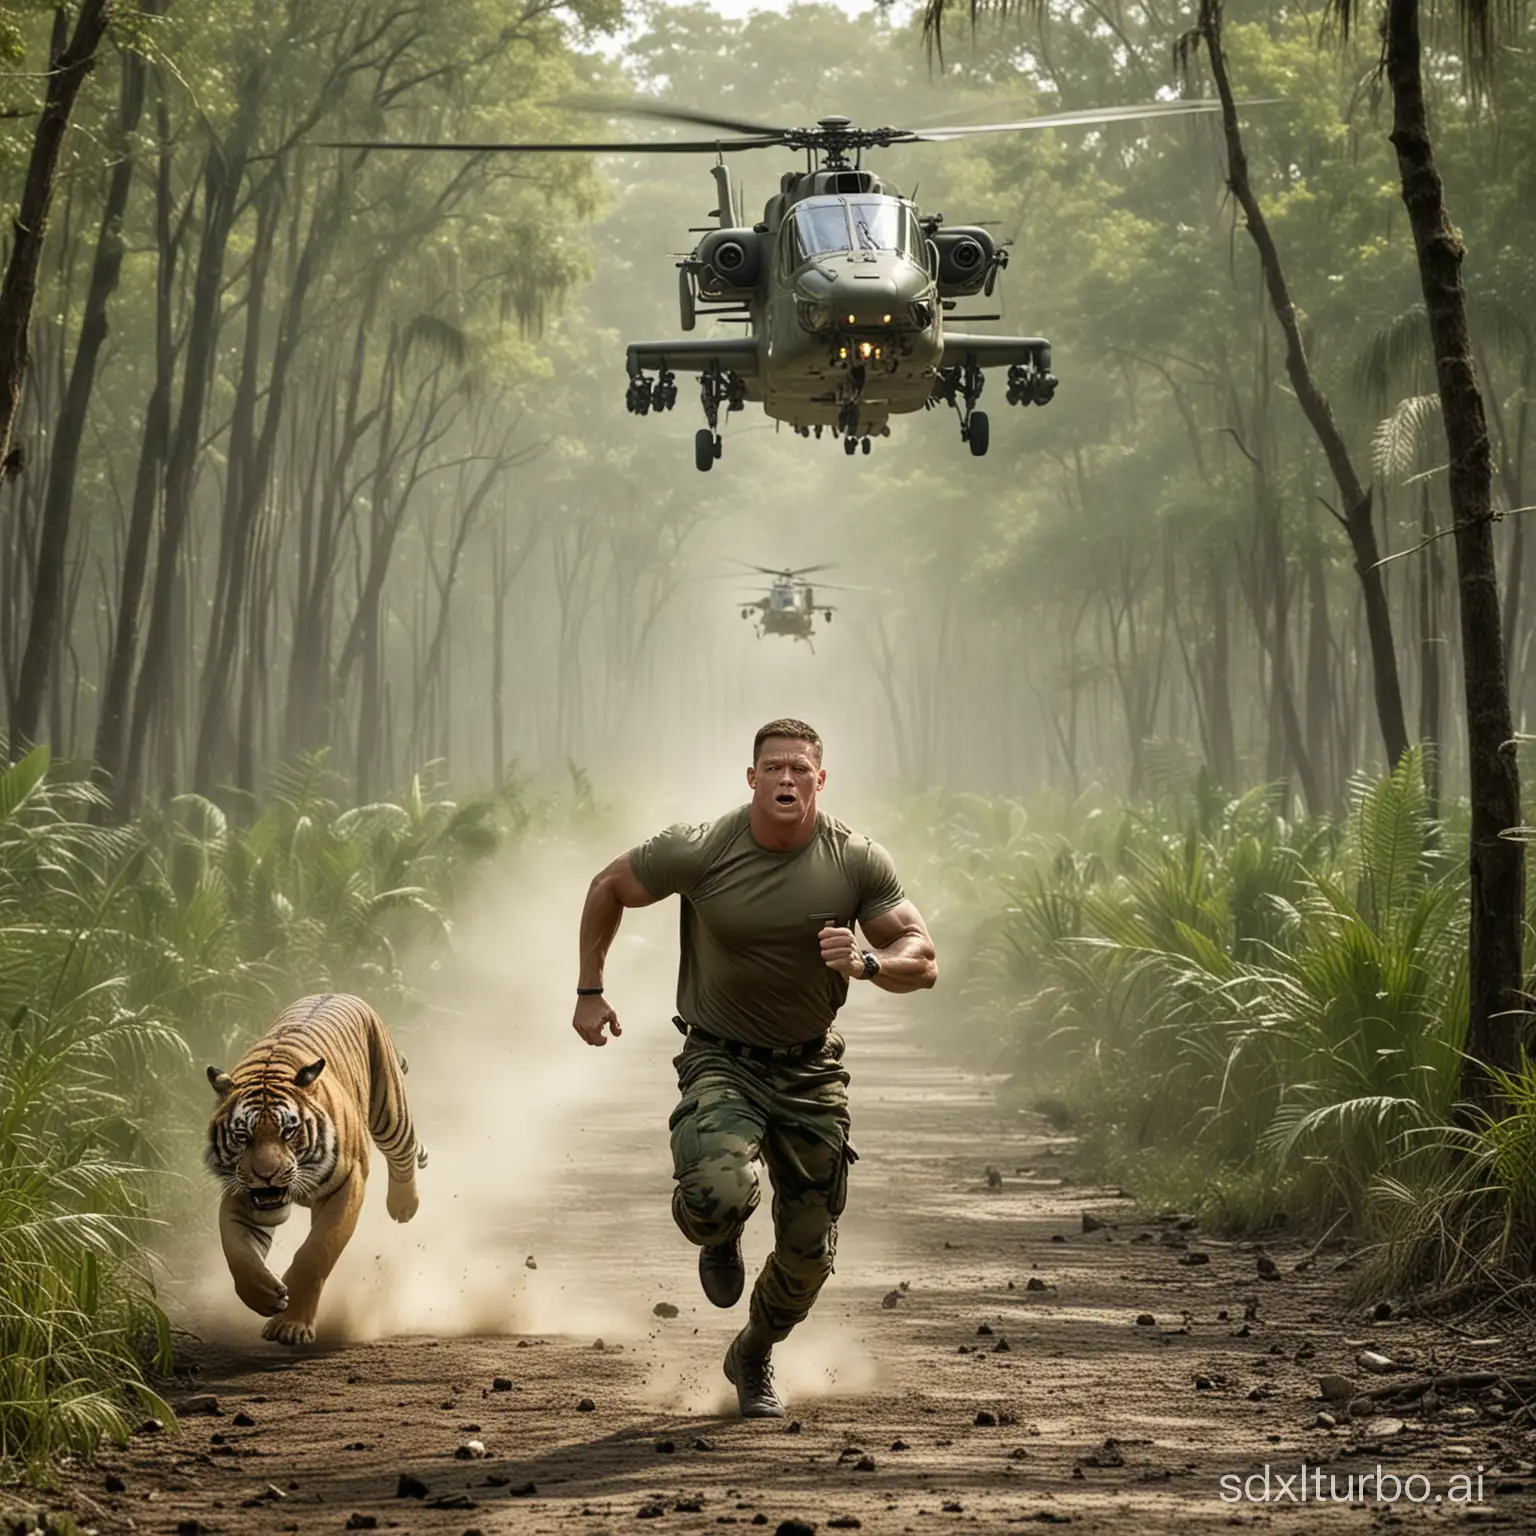 Thrilling-Chase-John-Cena-Escapes-Tiger-in-Woods-with-Alligator-and-Helicopter-Pursuit